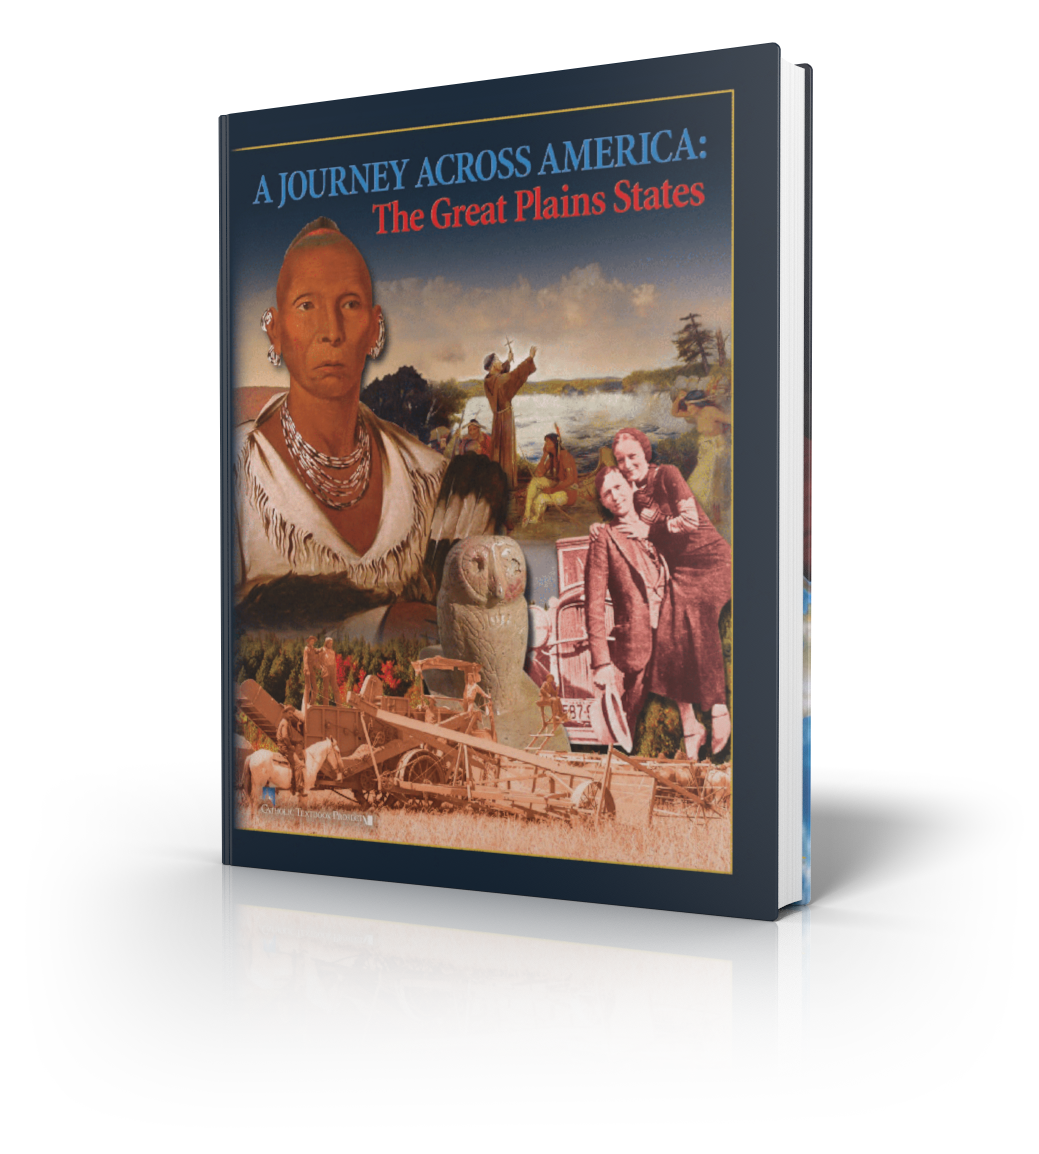 A Journey Across America: The Great Plains States (Textbook)